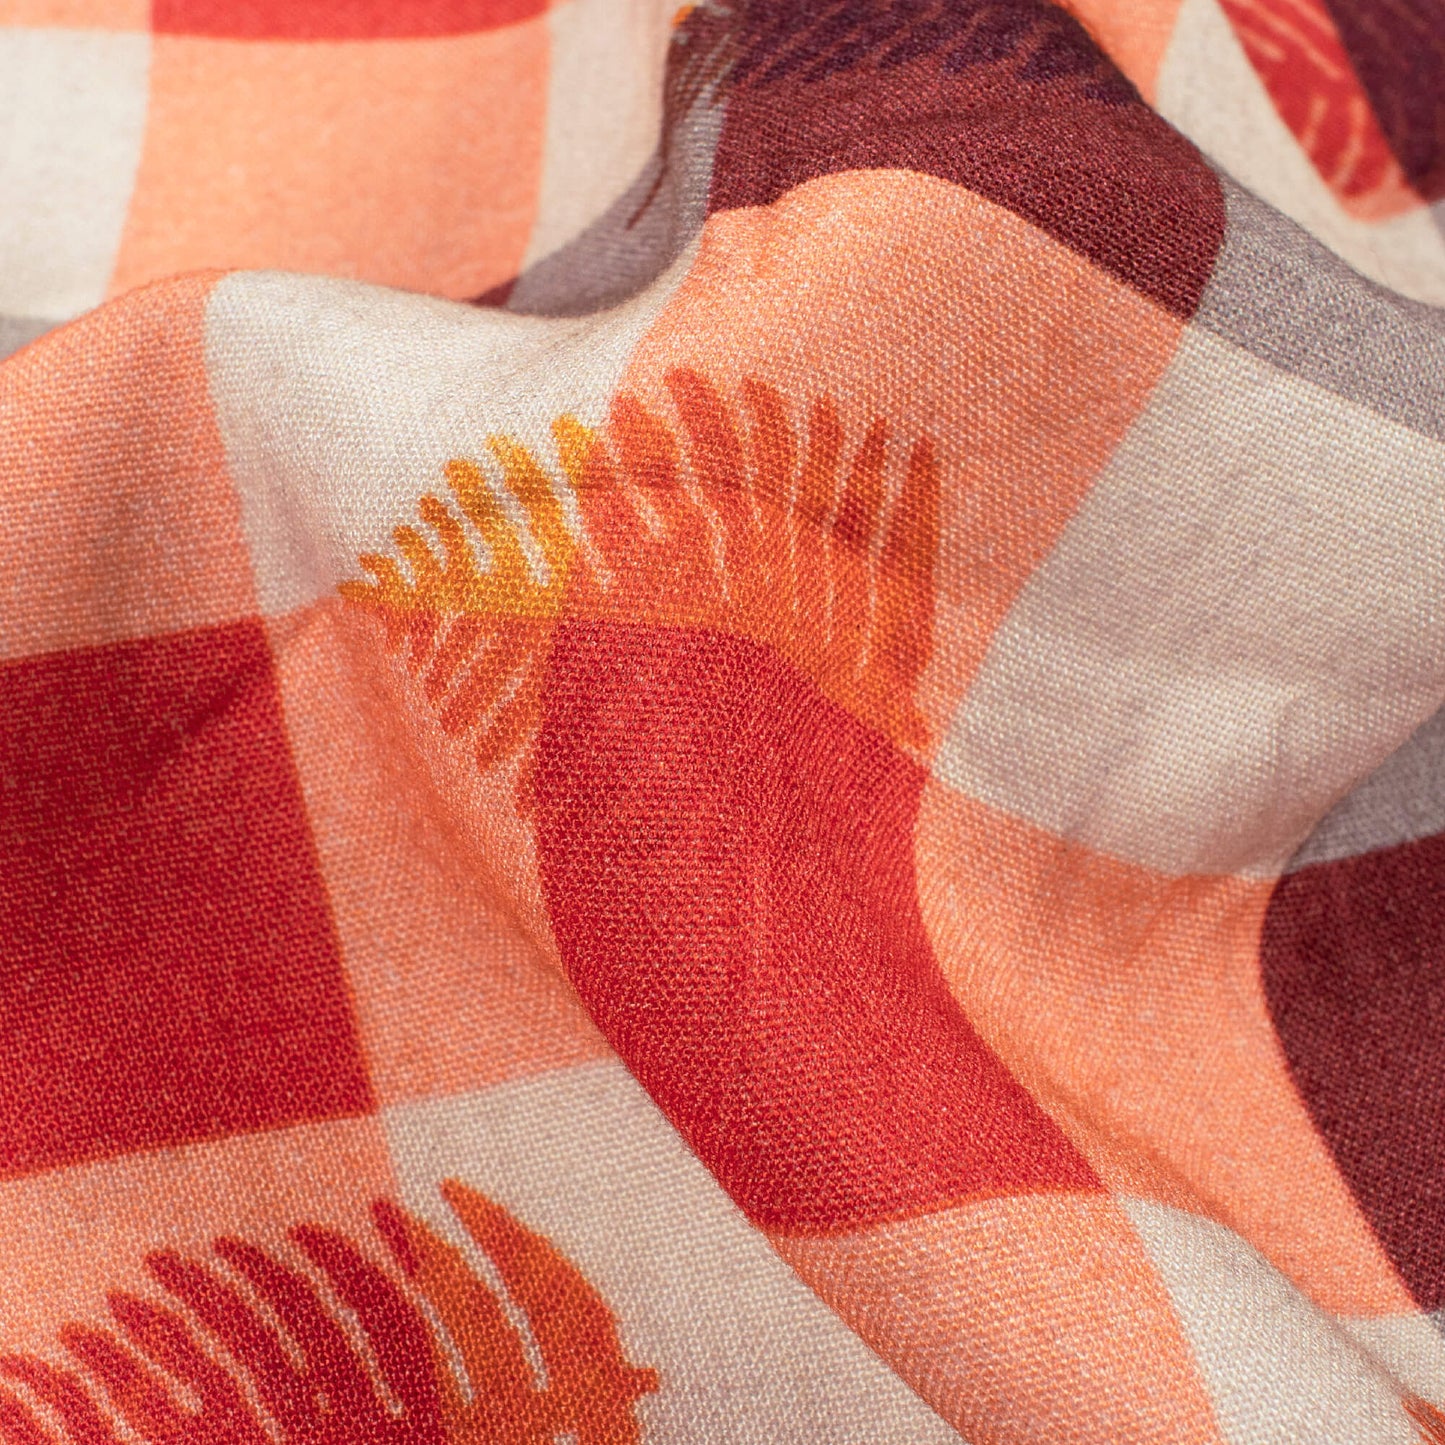 Coral Peach And Vermilion Red Checks Pattern Digital Print Viscose Rayon Fabric (Width 58 Inches)